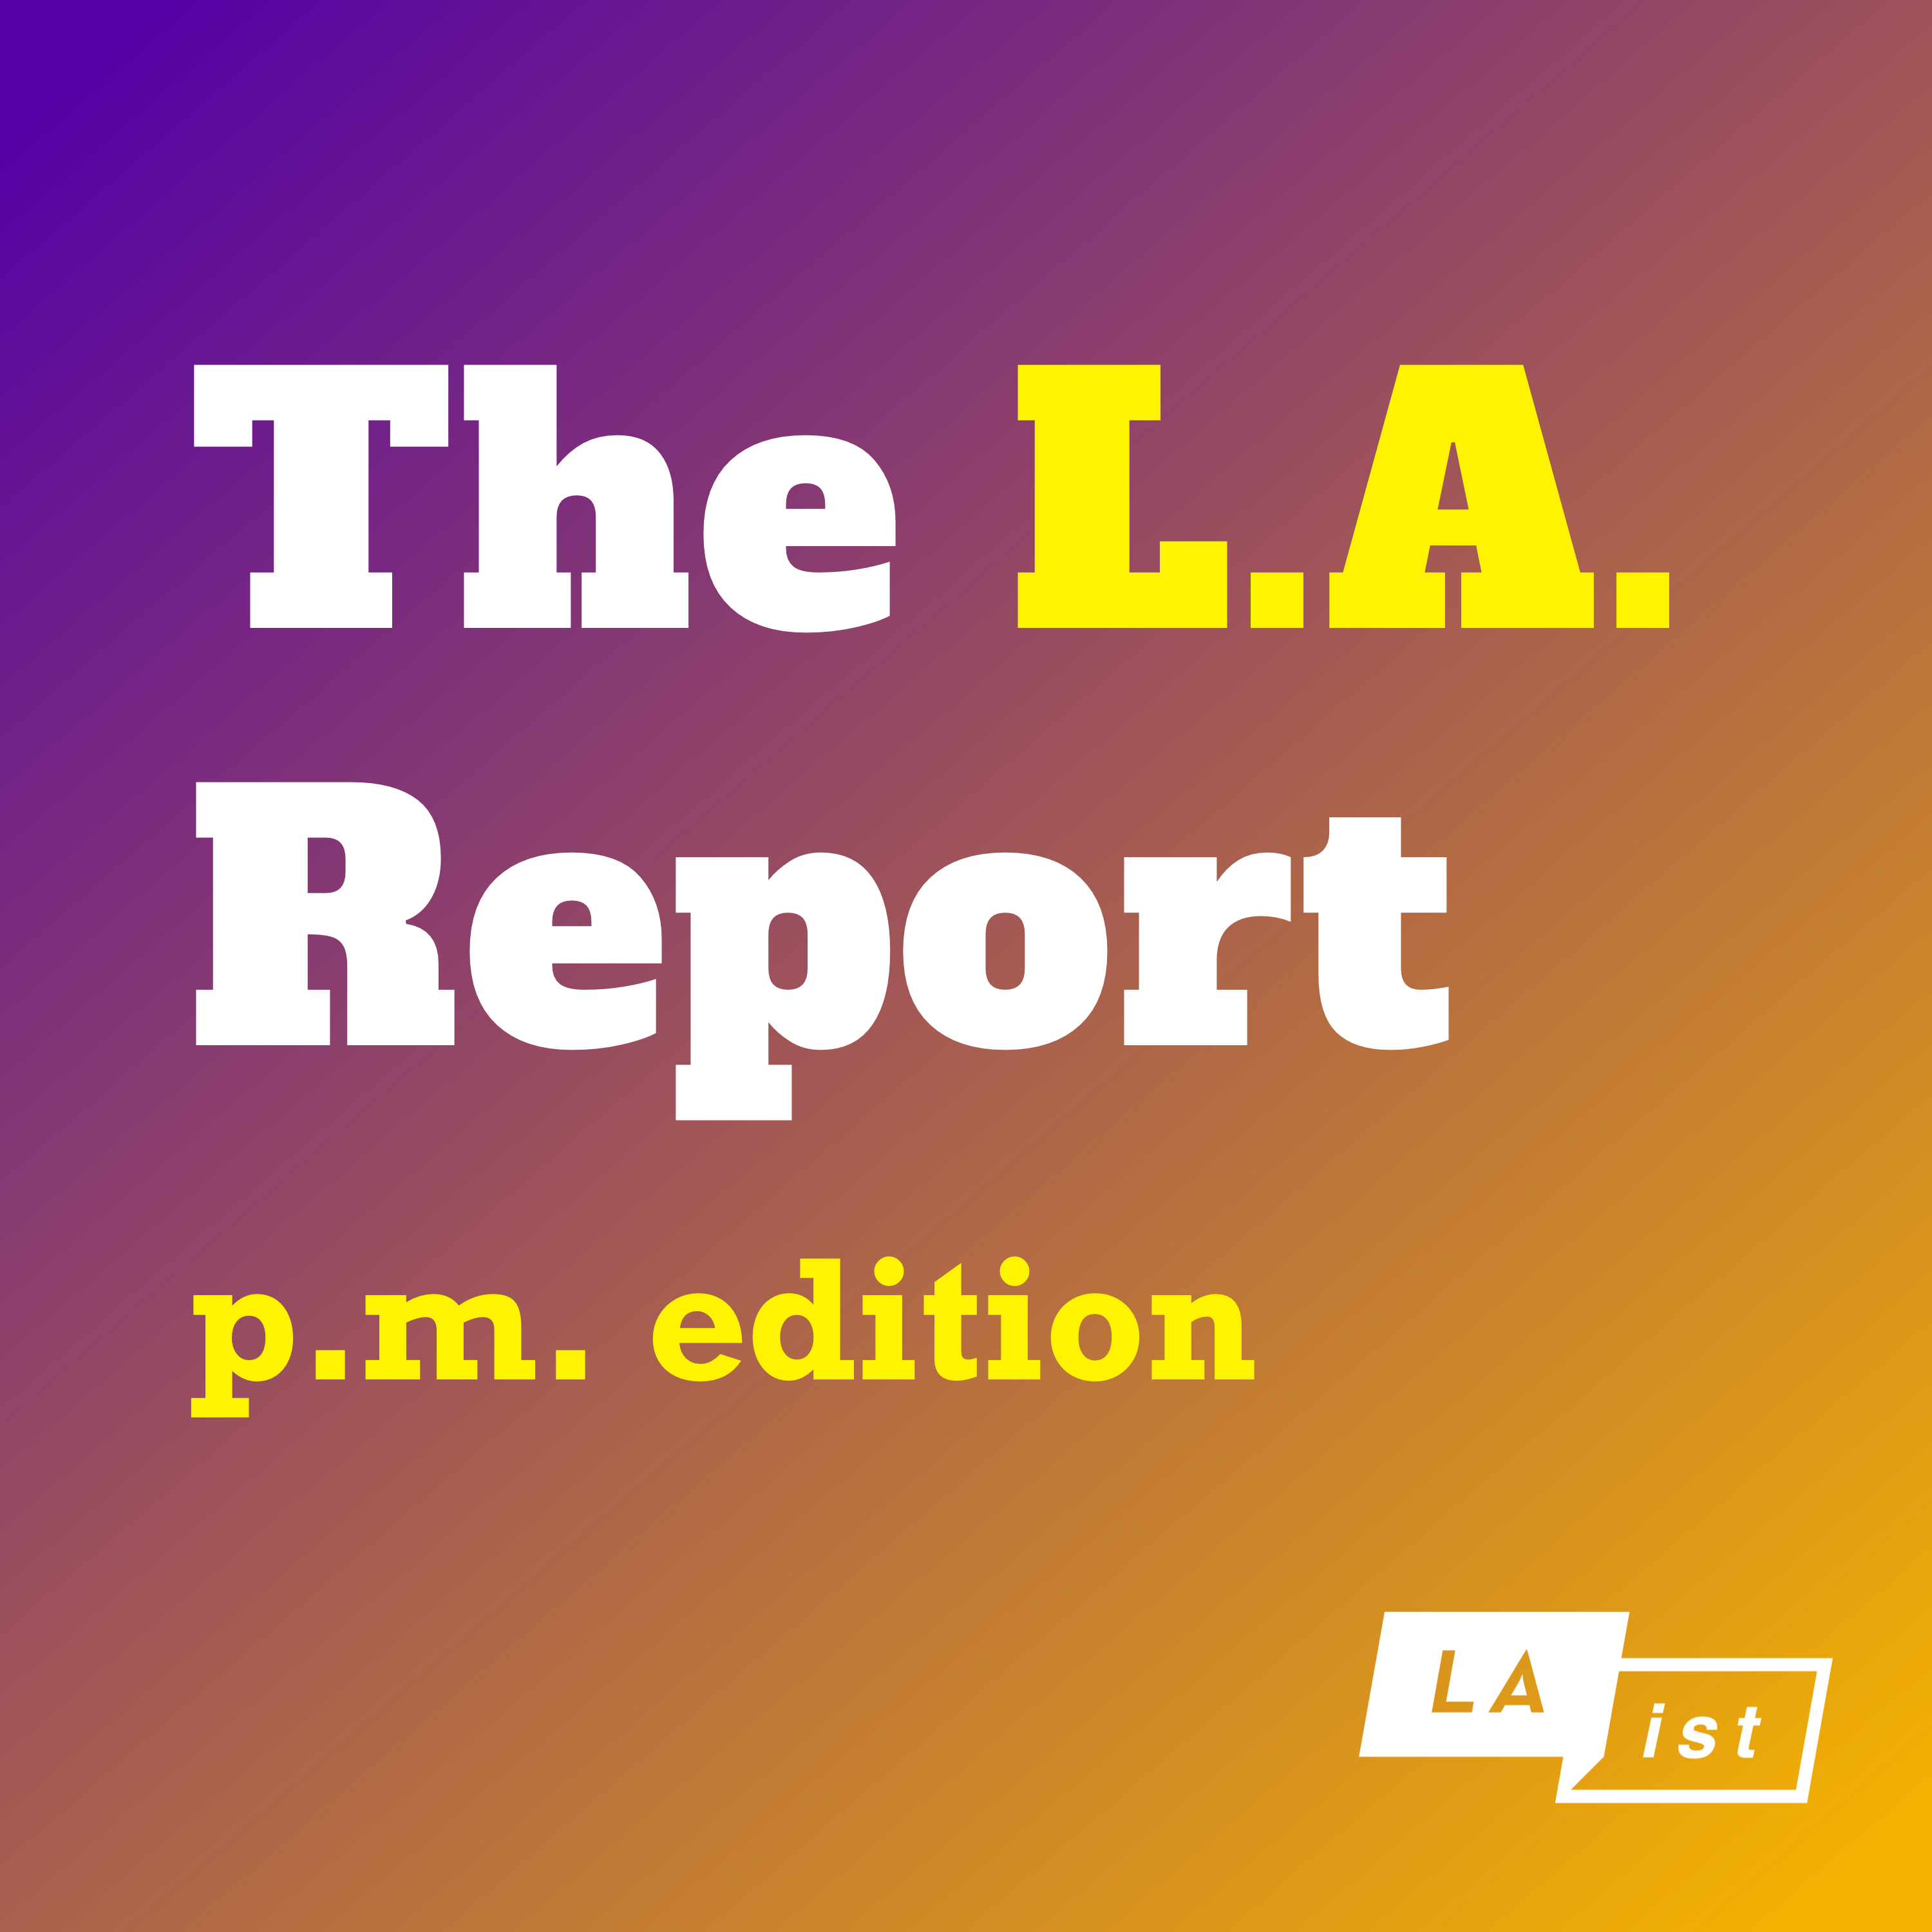 CA Releases Homelessness Spending Audit, LA Suspends Dog Breeding Permits, & Hollywood Bowl Parking Gets Cut— The P.M. Edition